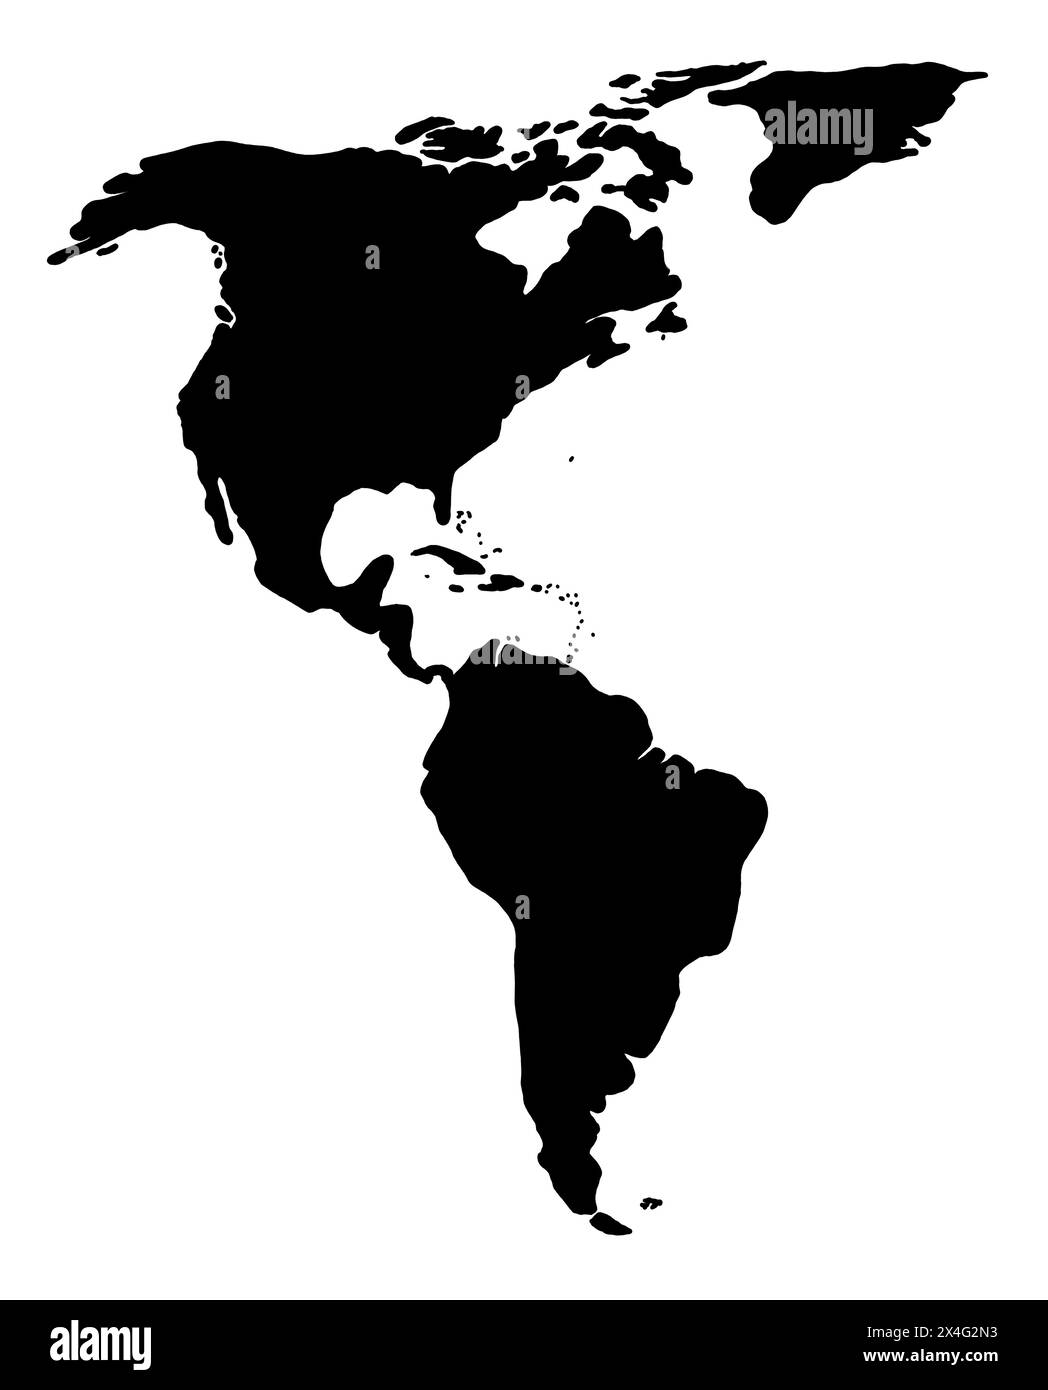 Black silhouette of South and North America on the white background. World map illustration with the American continents. Stock Photo